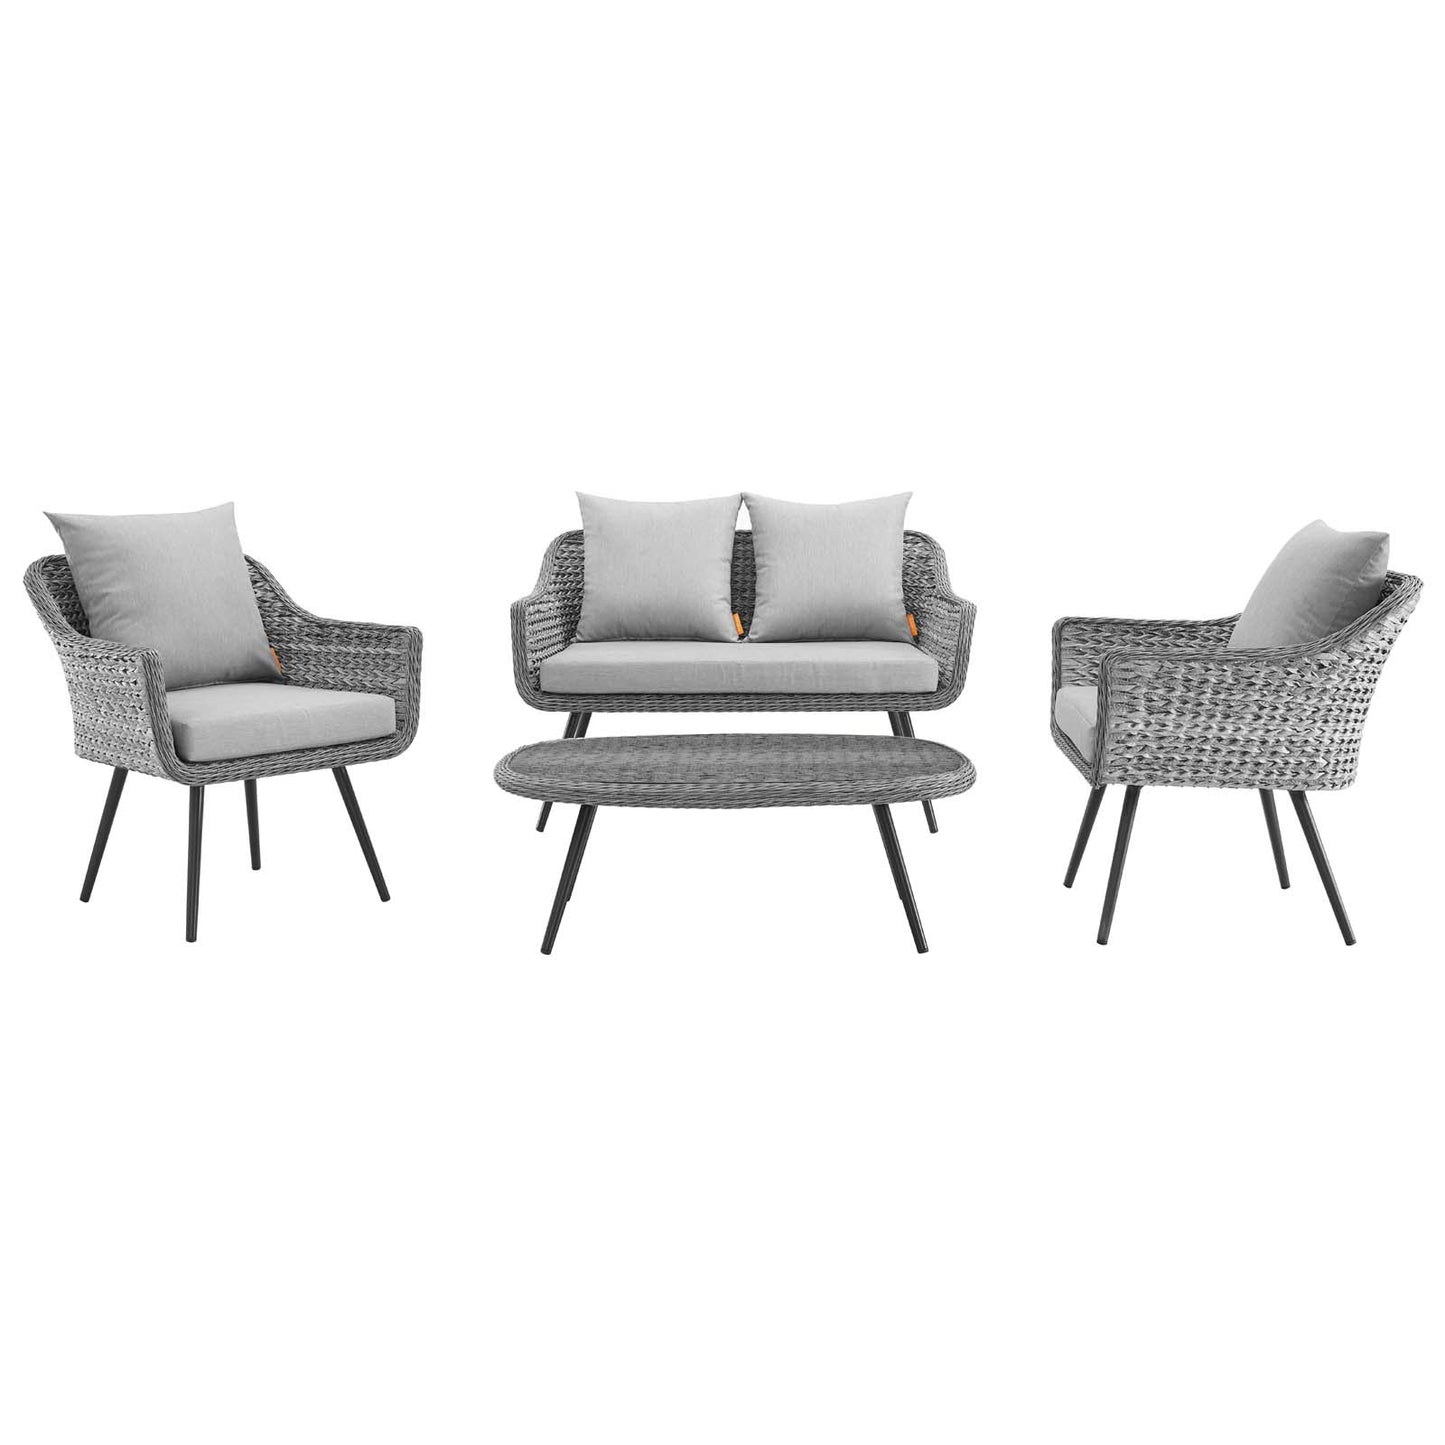 Endeavor 4 Piece Outdoor Patio Wicker Rattan Loveseat Armchair and Coffee Table Set Gray Gray EEI-3177-GRY-GRY-SET